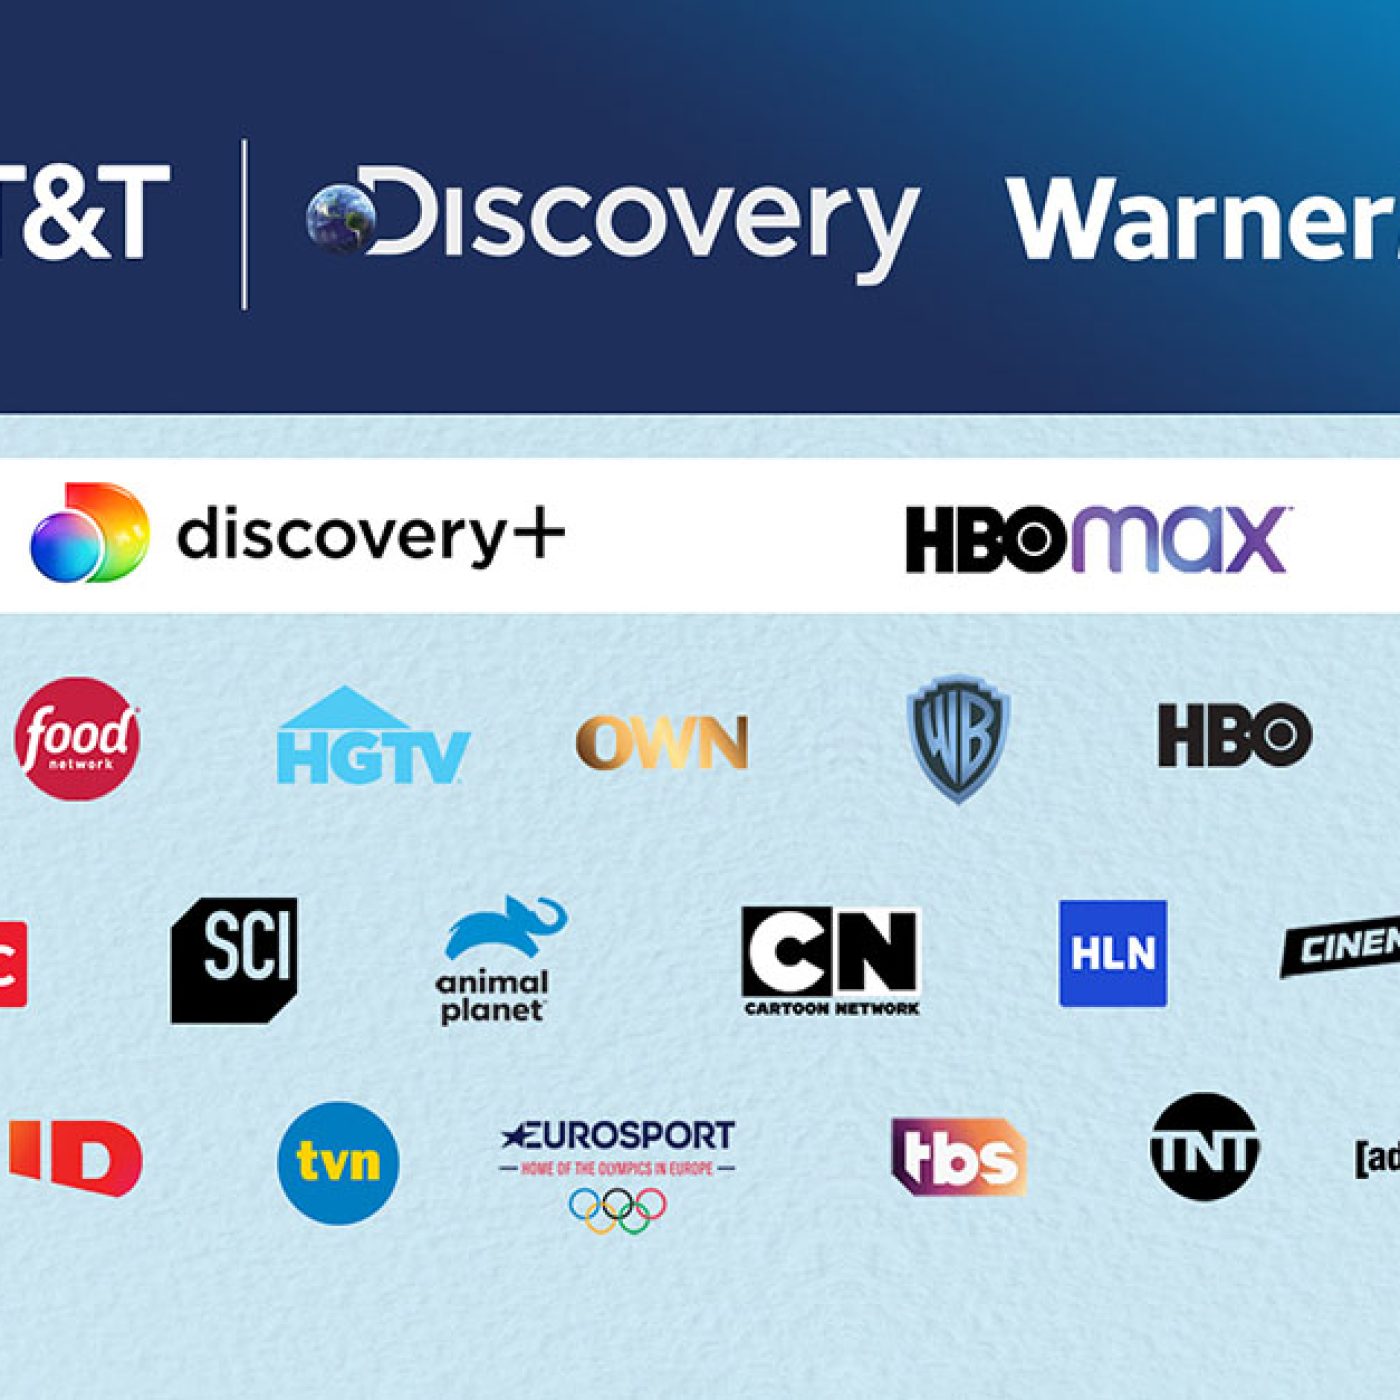 discovery+ is now streaming on the Roku platform